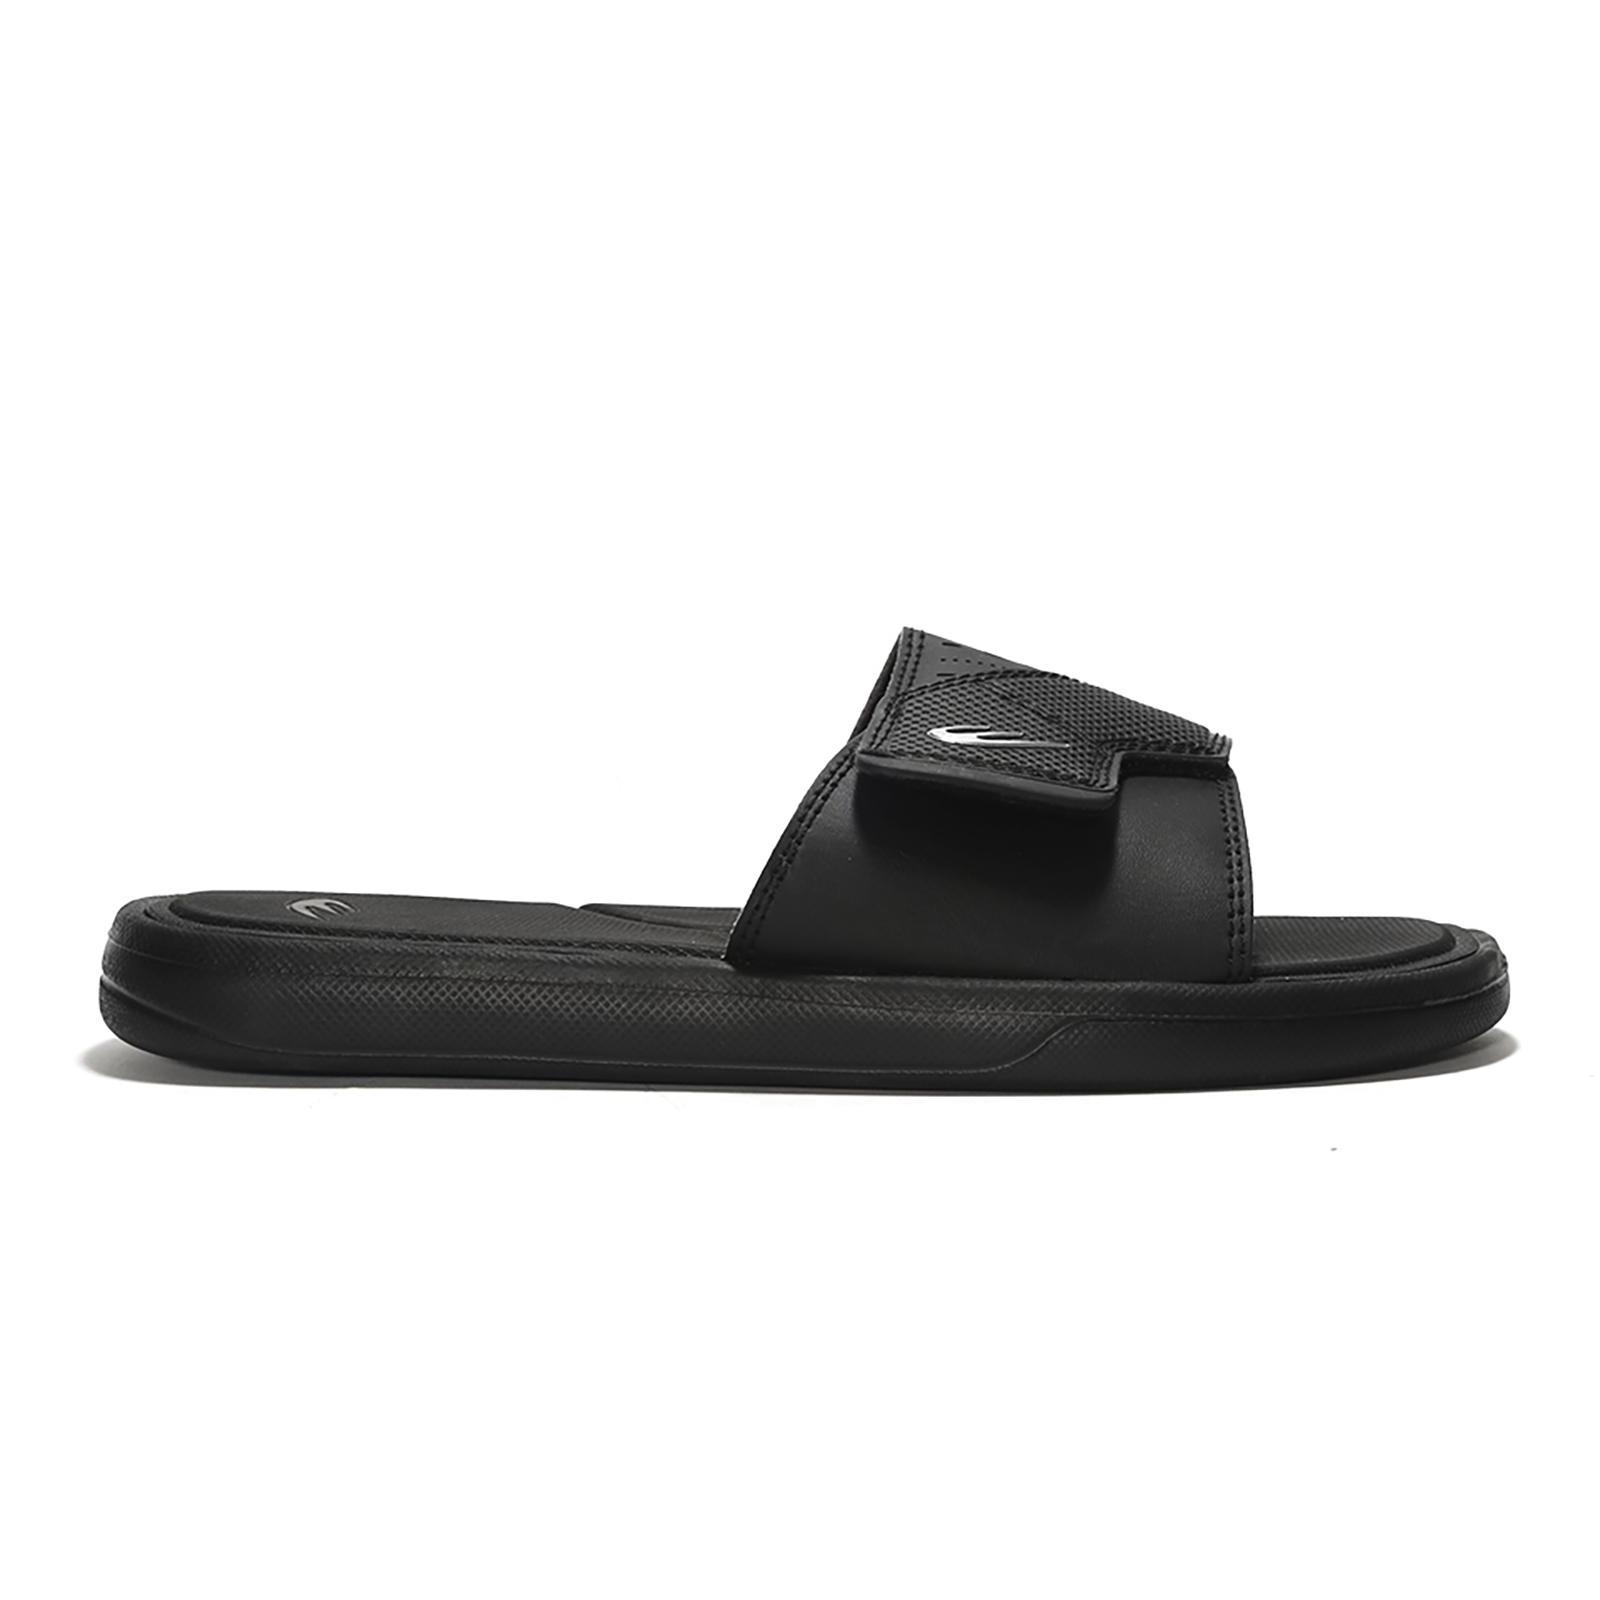 World Balance AFTER PLAY Men's Slippers 